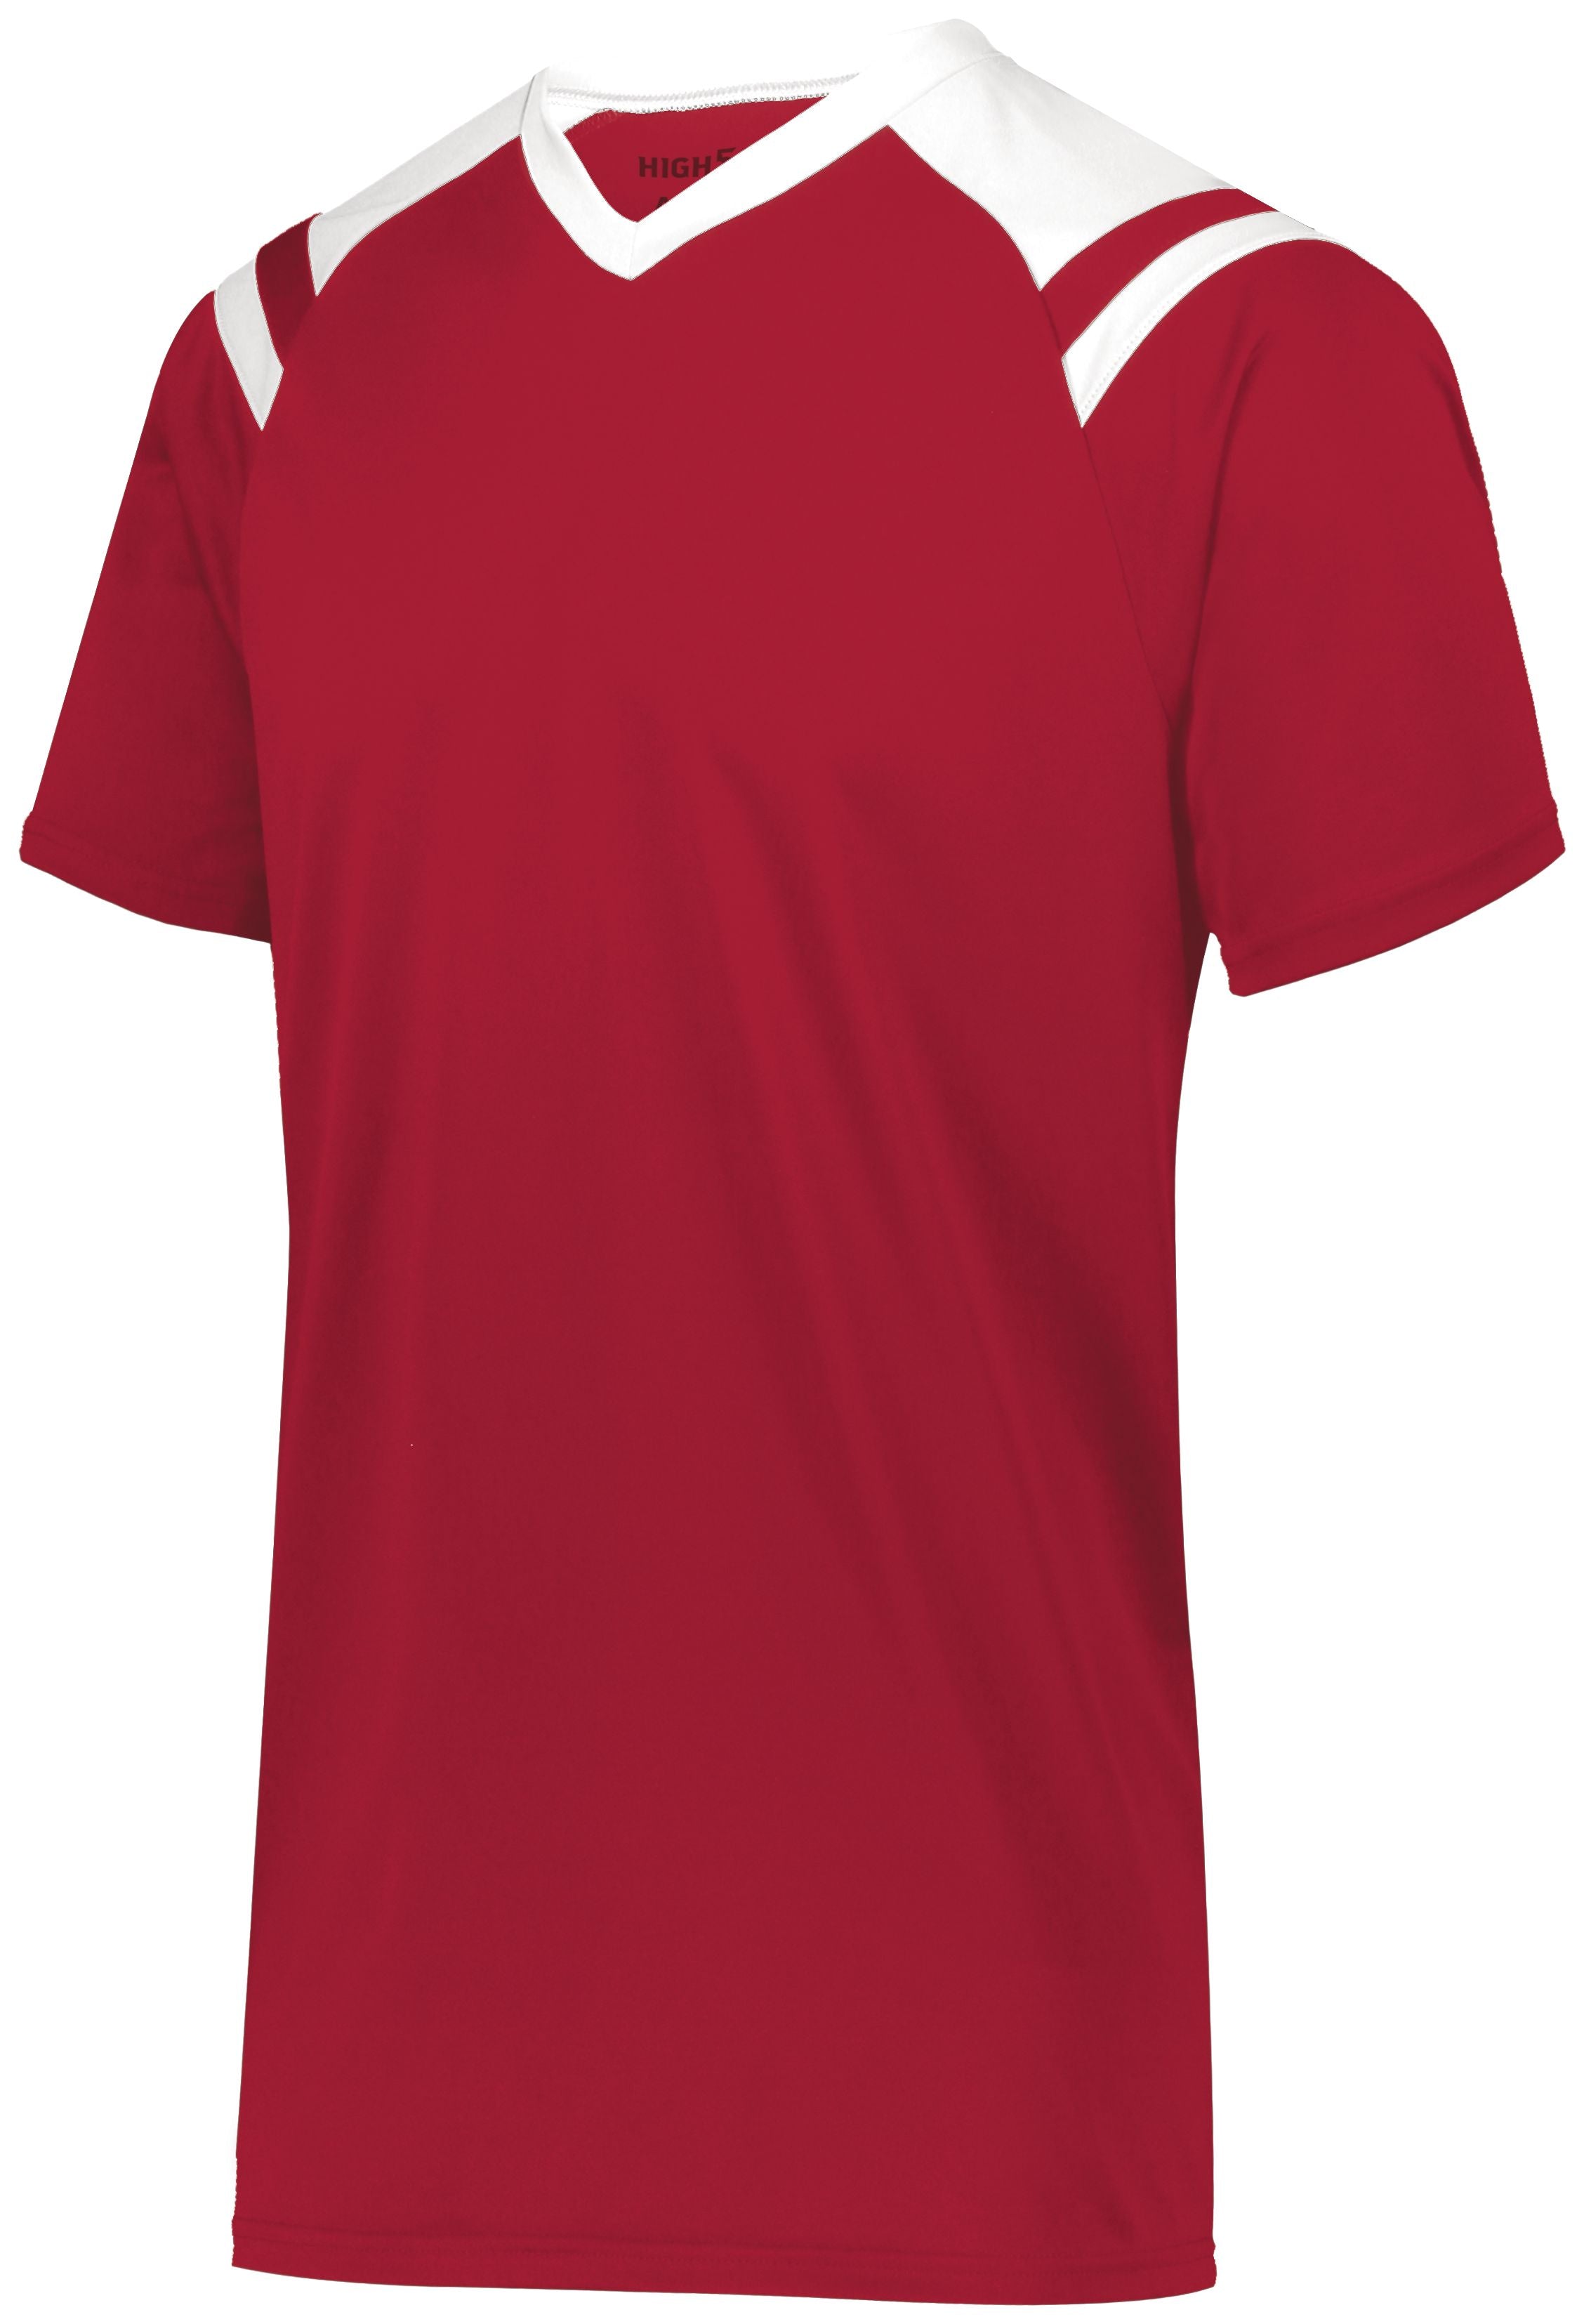 High 5 Sheffield Jersey in Scarlet/White  -Part of the Adult, Adult-Jersey, High5-Products, Soccer, Shirts, All-Sports-1, Sheffield-Soccer-Jerseys product lines at KanaleyCreations.com